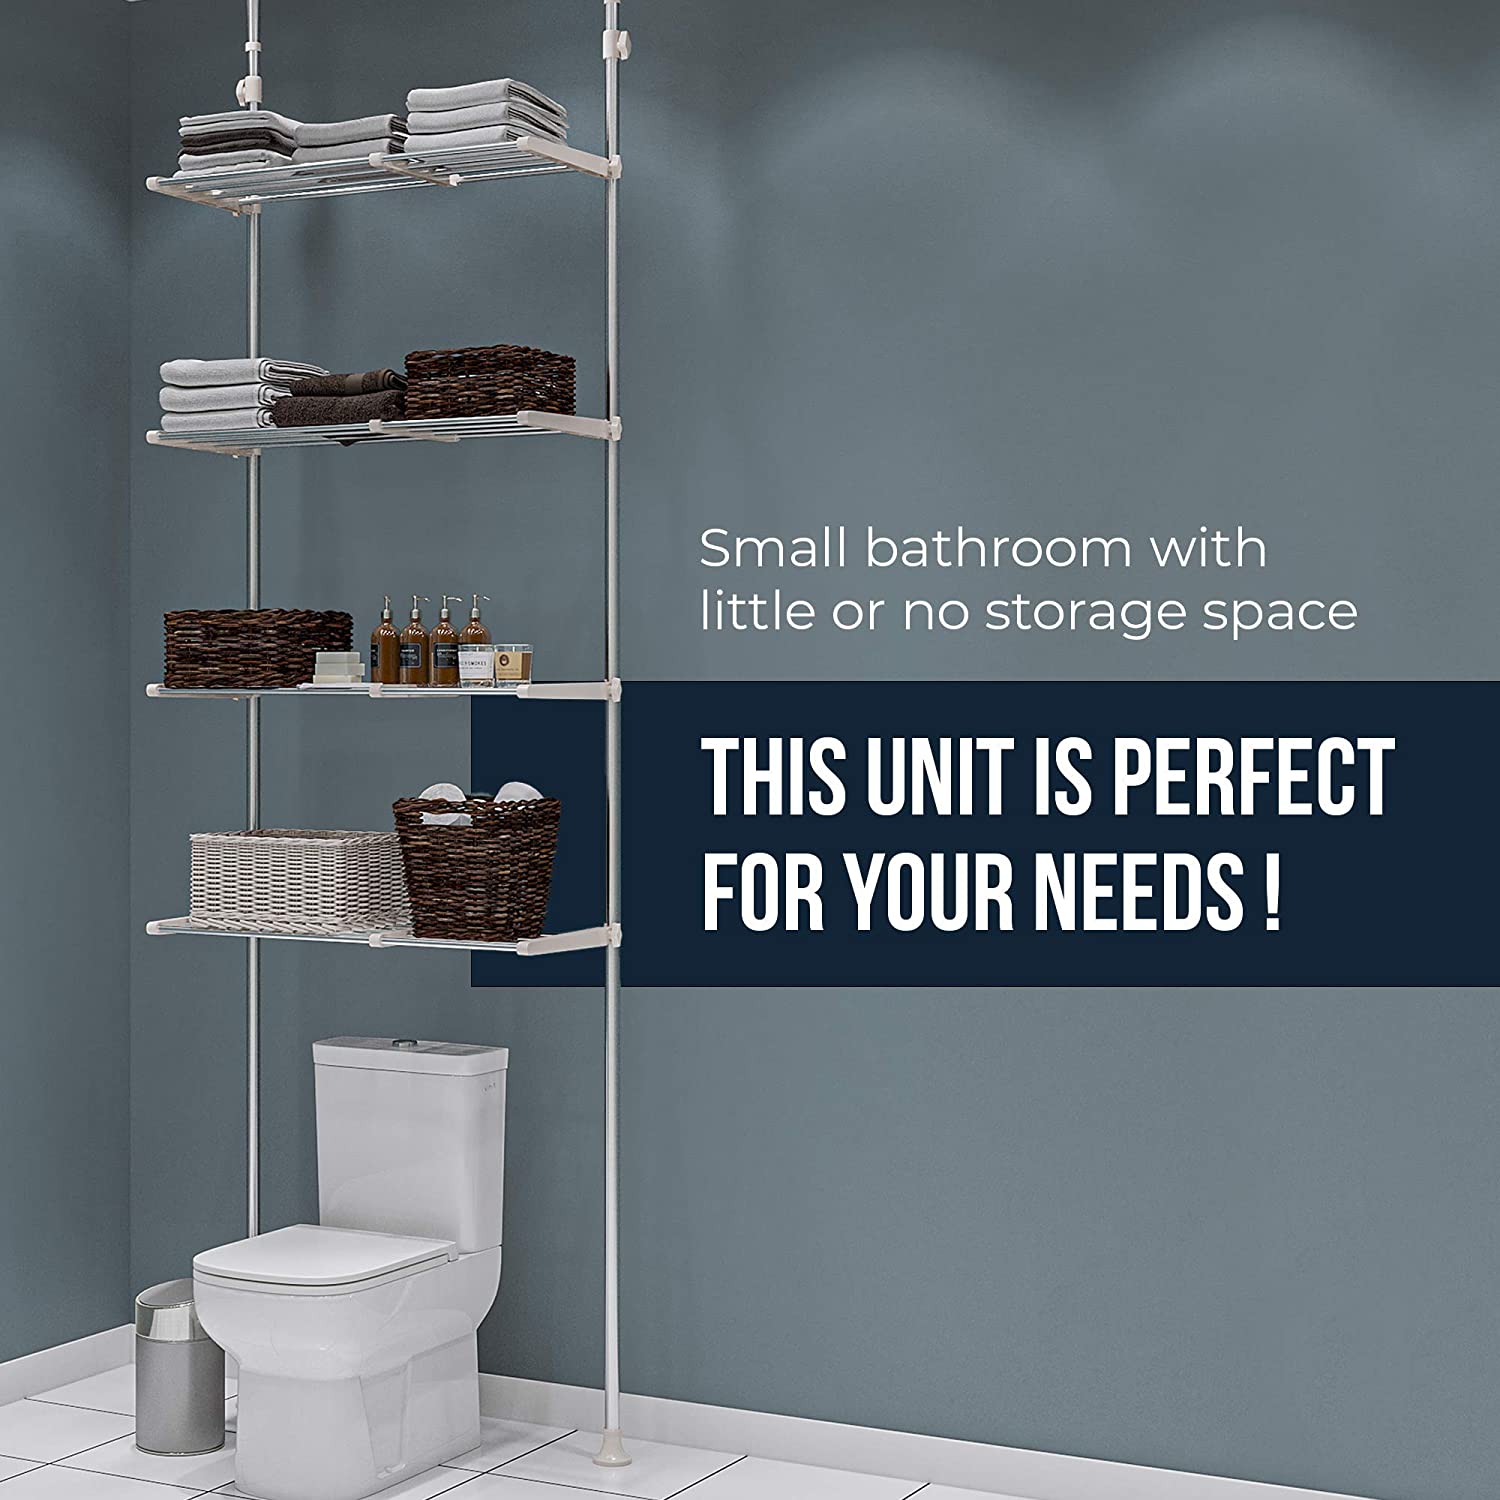 Skywin Over The Washer Storage Shelf - Easy to Assemble Laundry Storage, Laundry Shelf for Over Washer or Dryer with Adjustable Height and Width, No